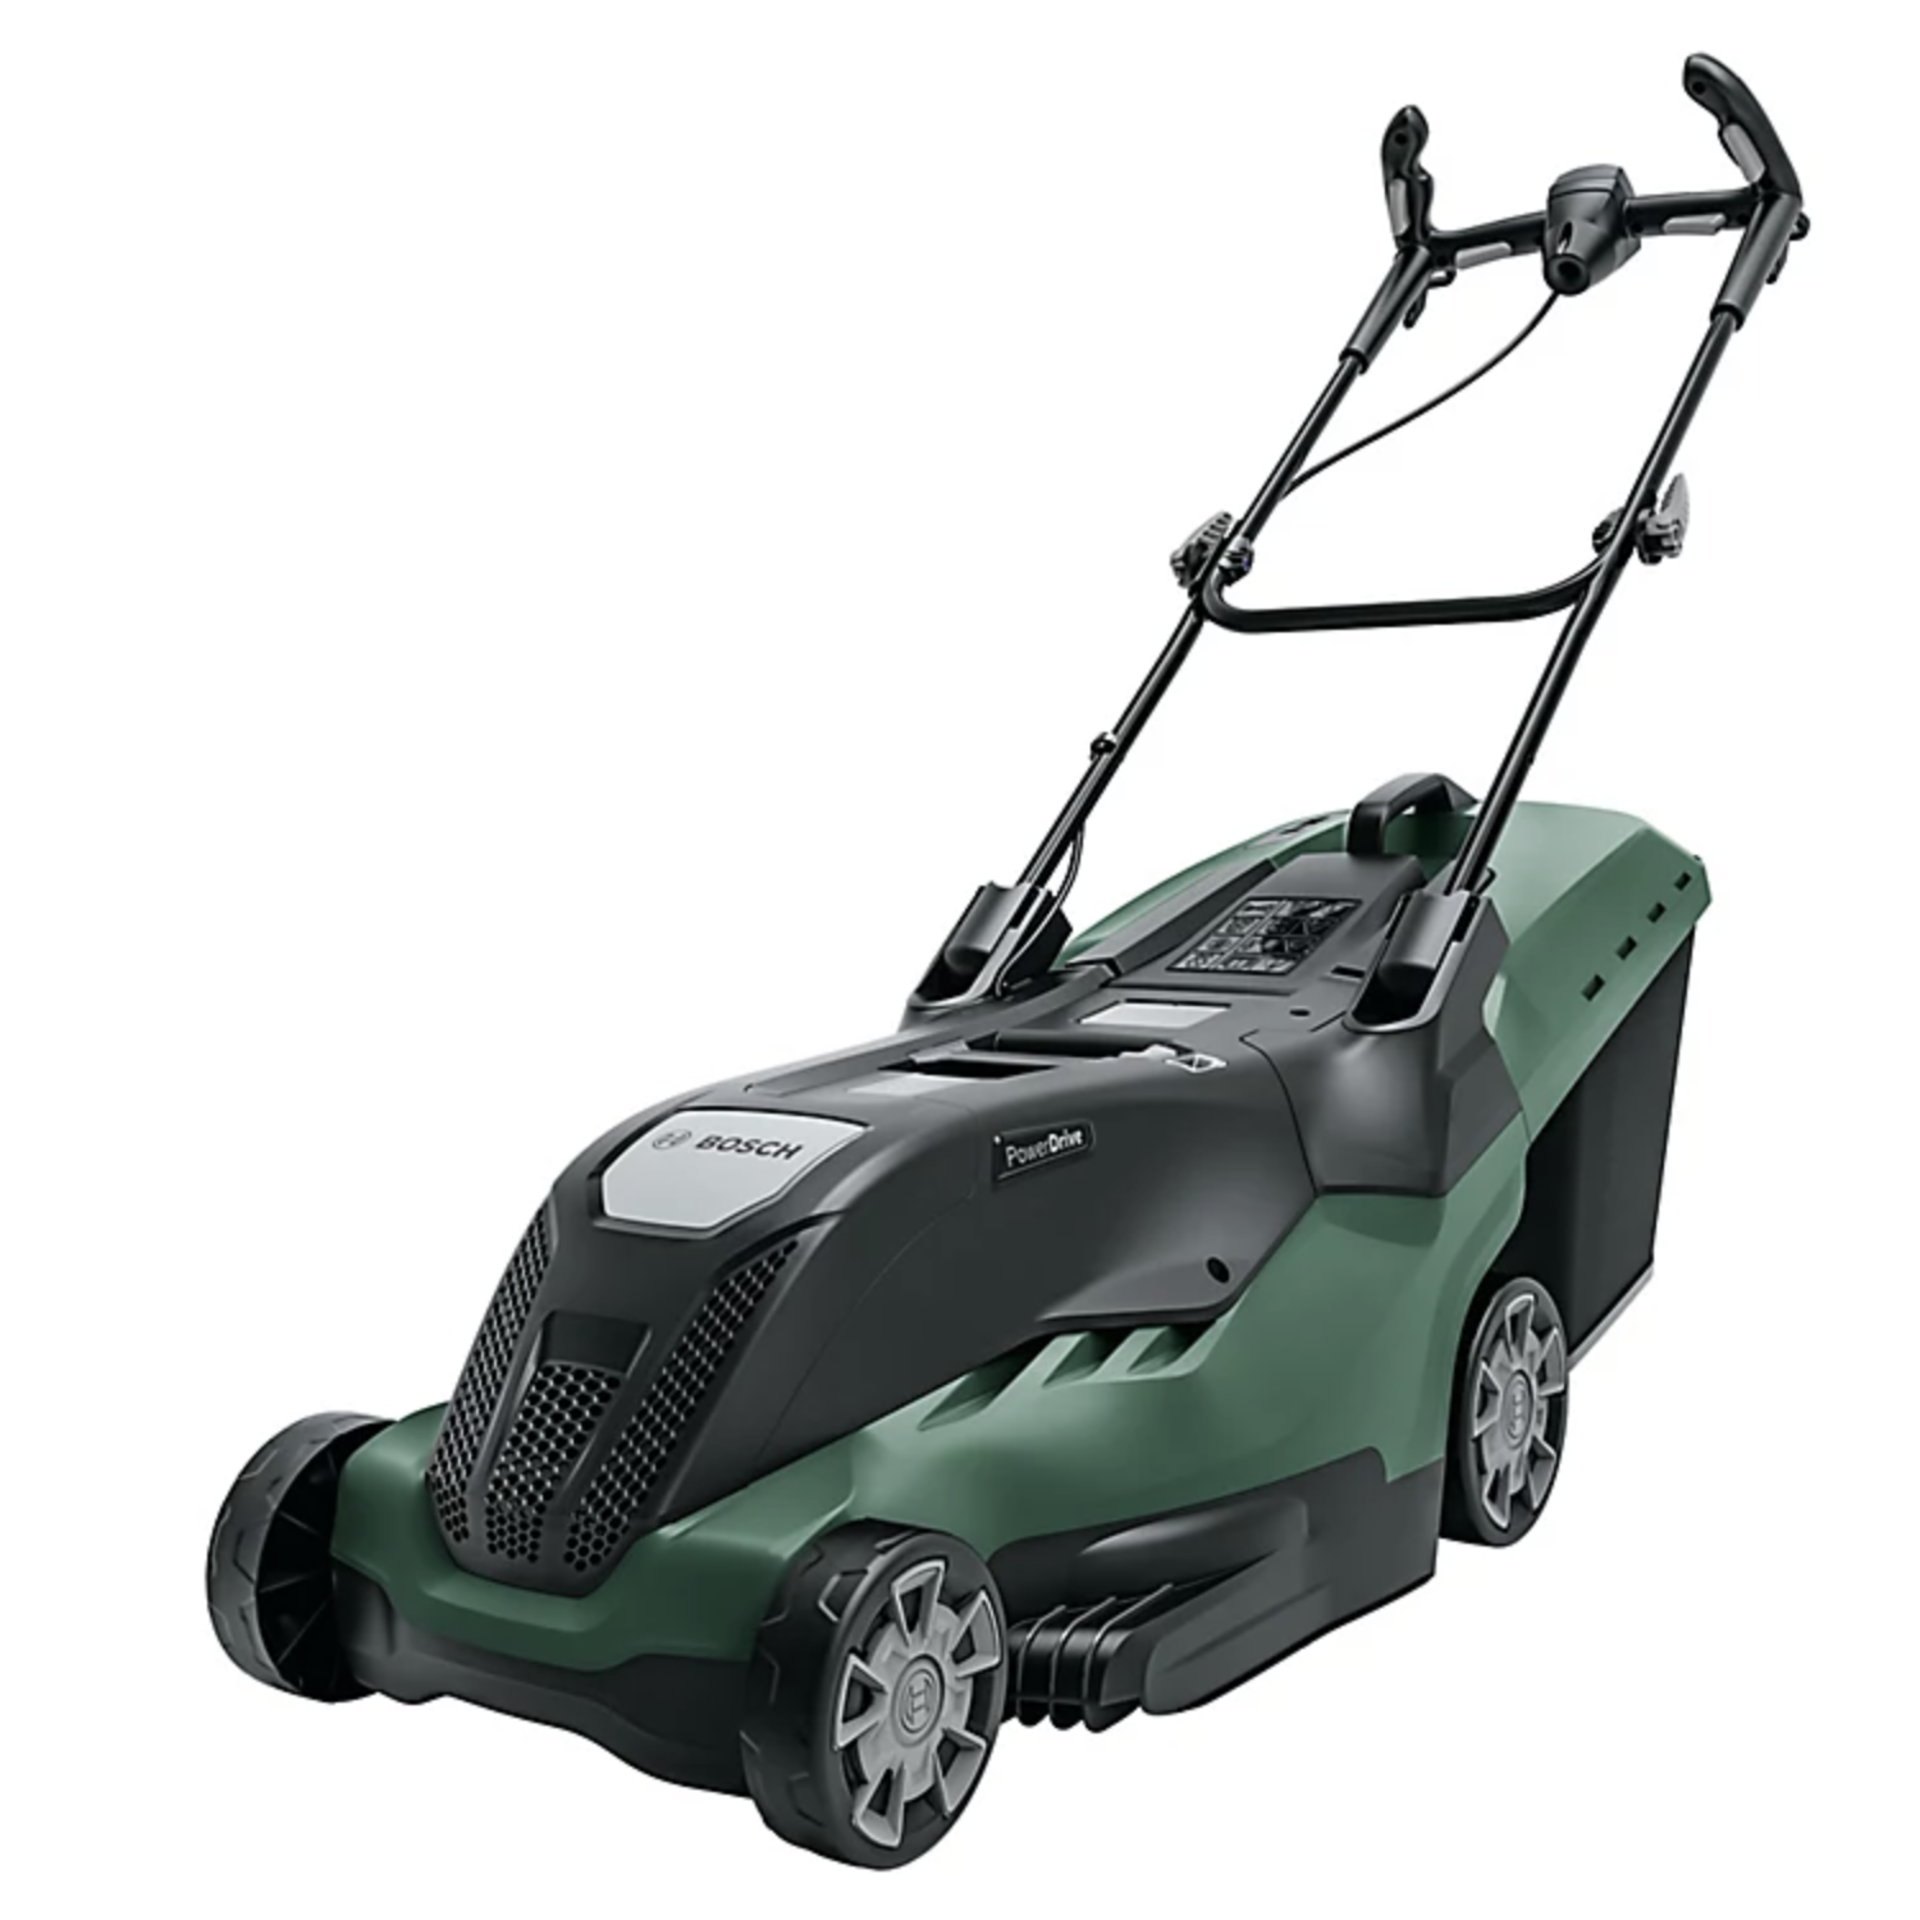 UNBOXED UNIVERSAL ROTAK 650 ERGO LIFT POWER DRIVE LAWN MOWER RRP 259Condition ReportAppraisal